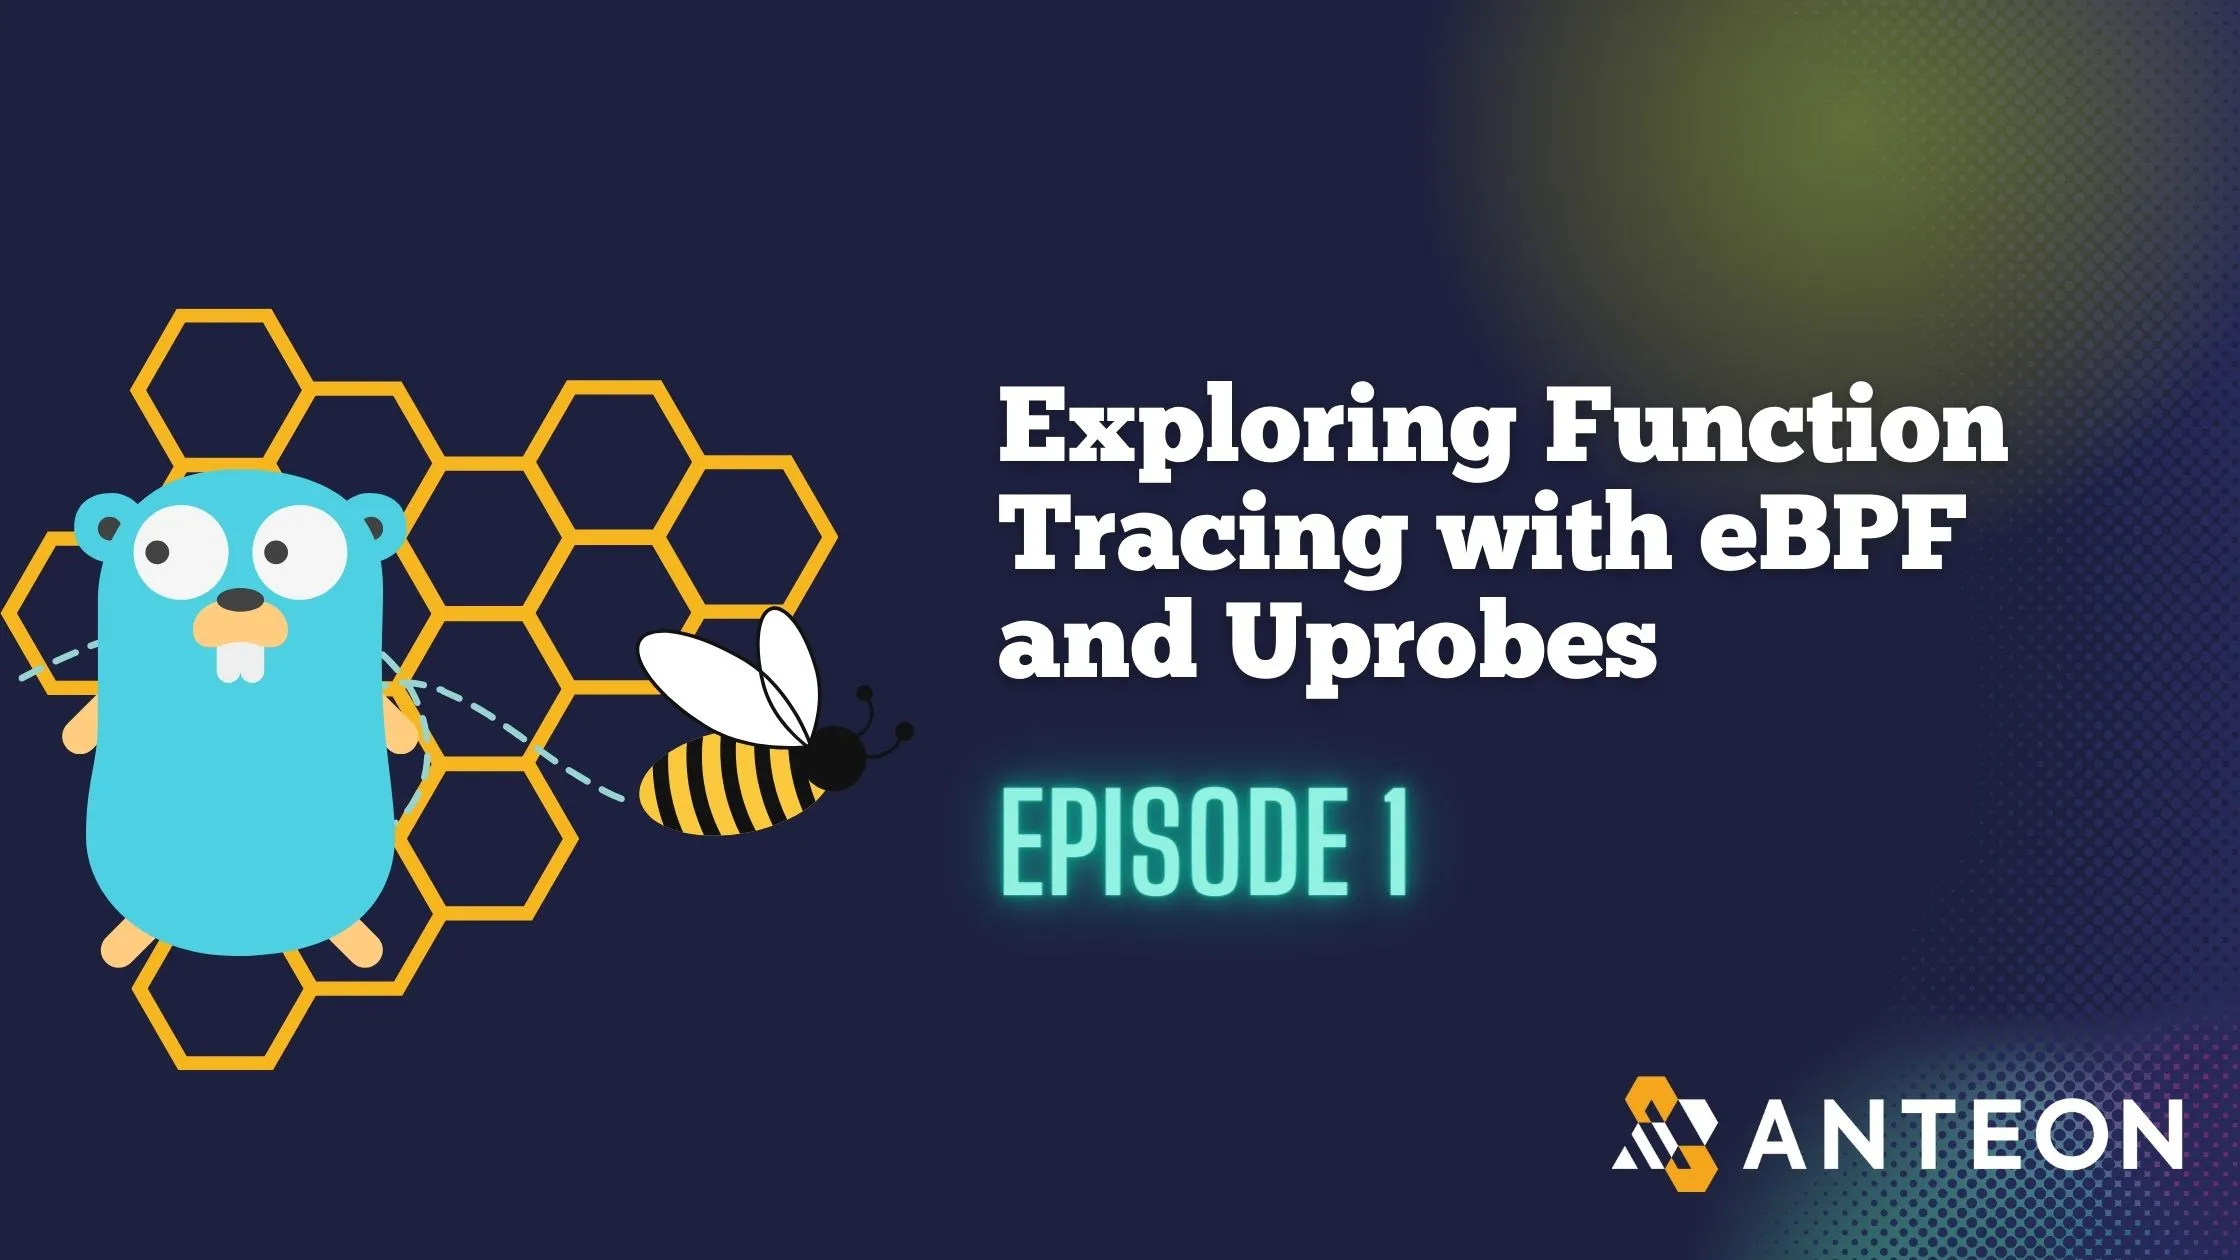 Exploring Function Tracing with eBPF and Uprobes - Episode 1